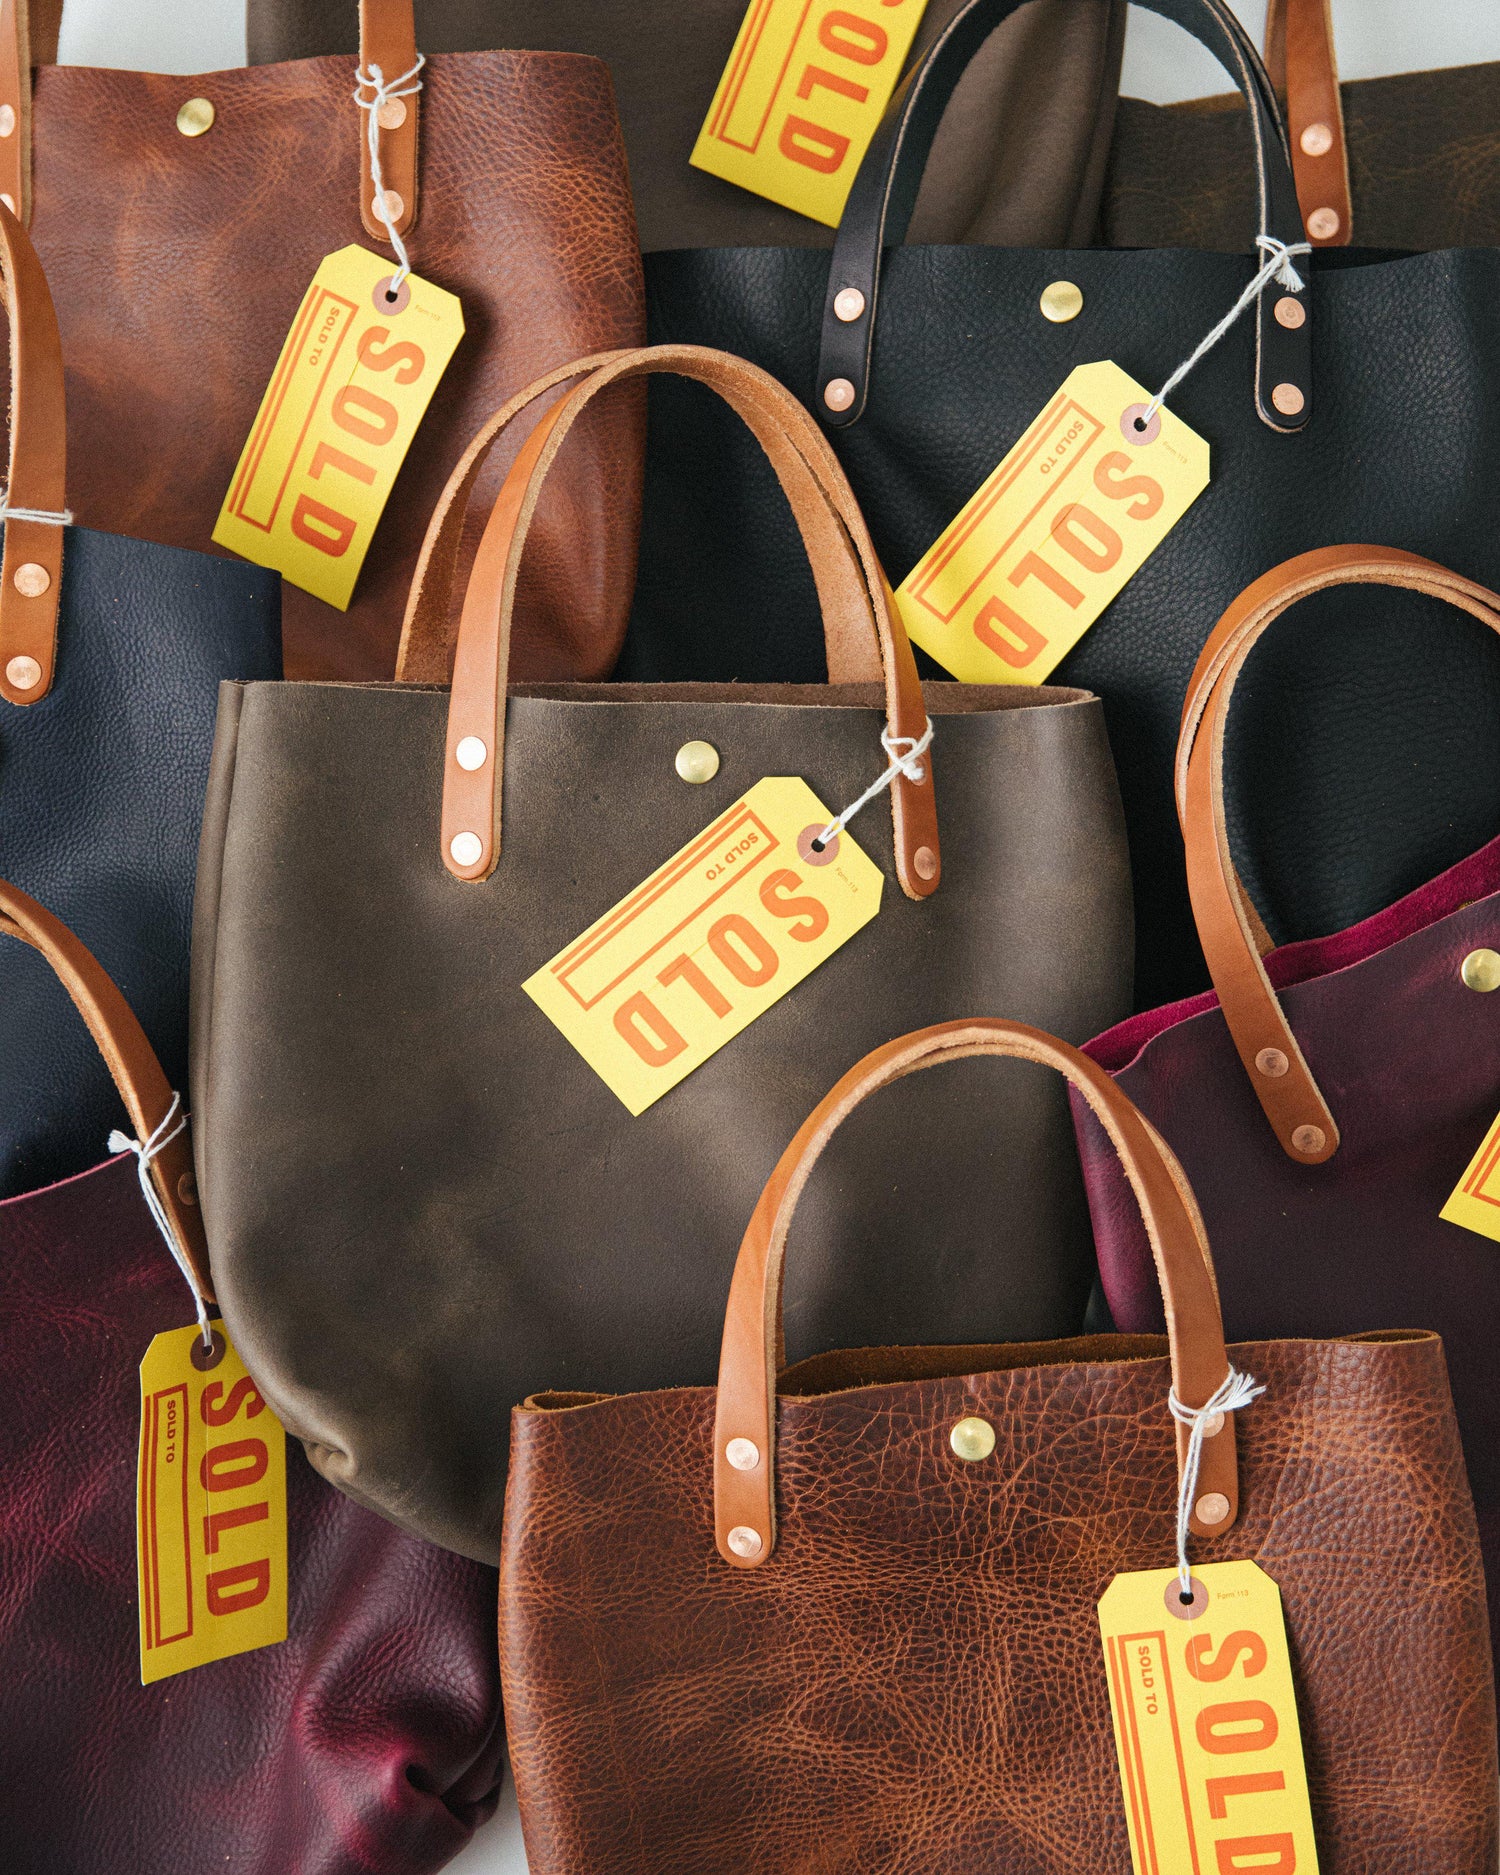 Mini Tote Bags: The Perfect Leather Tote for Everyday